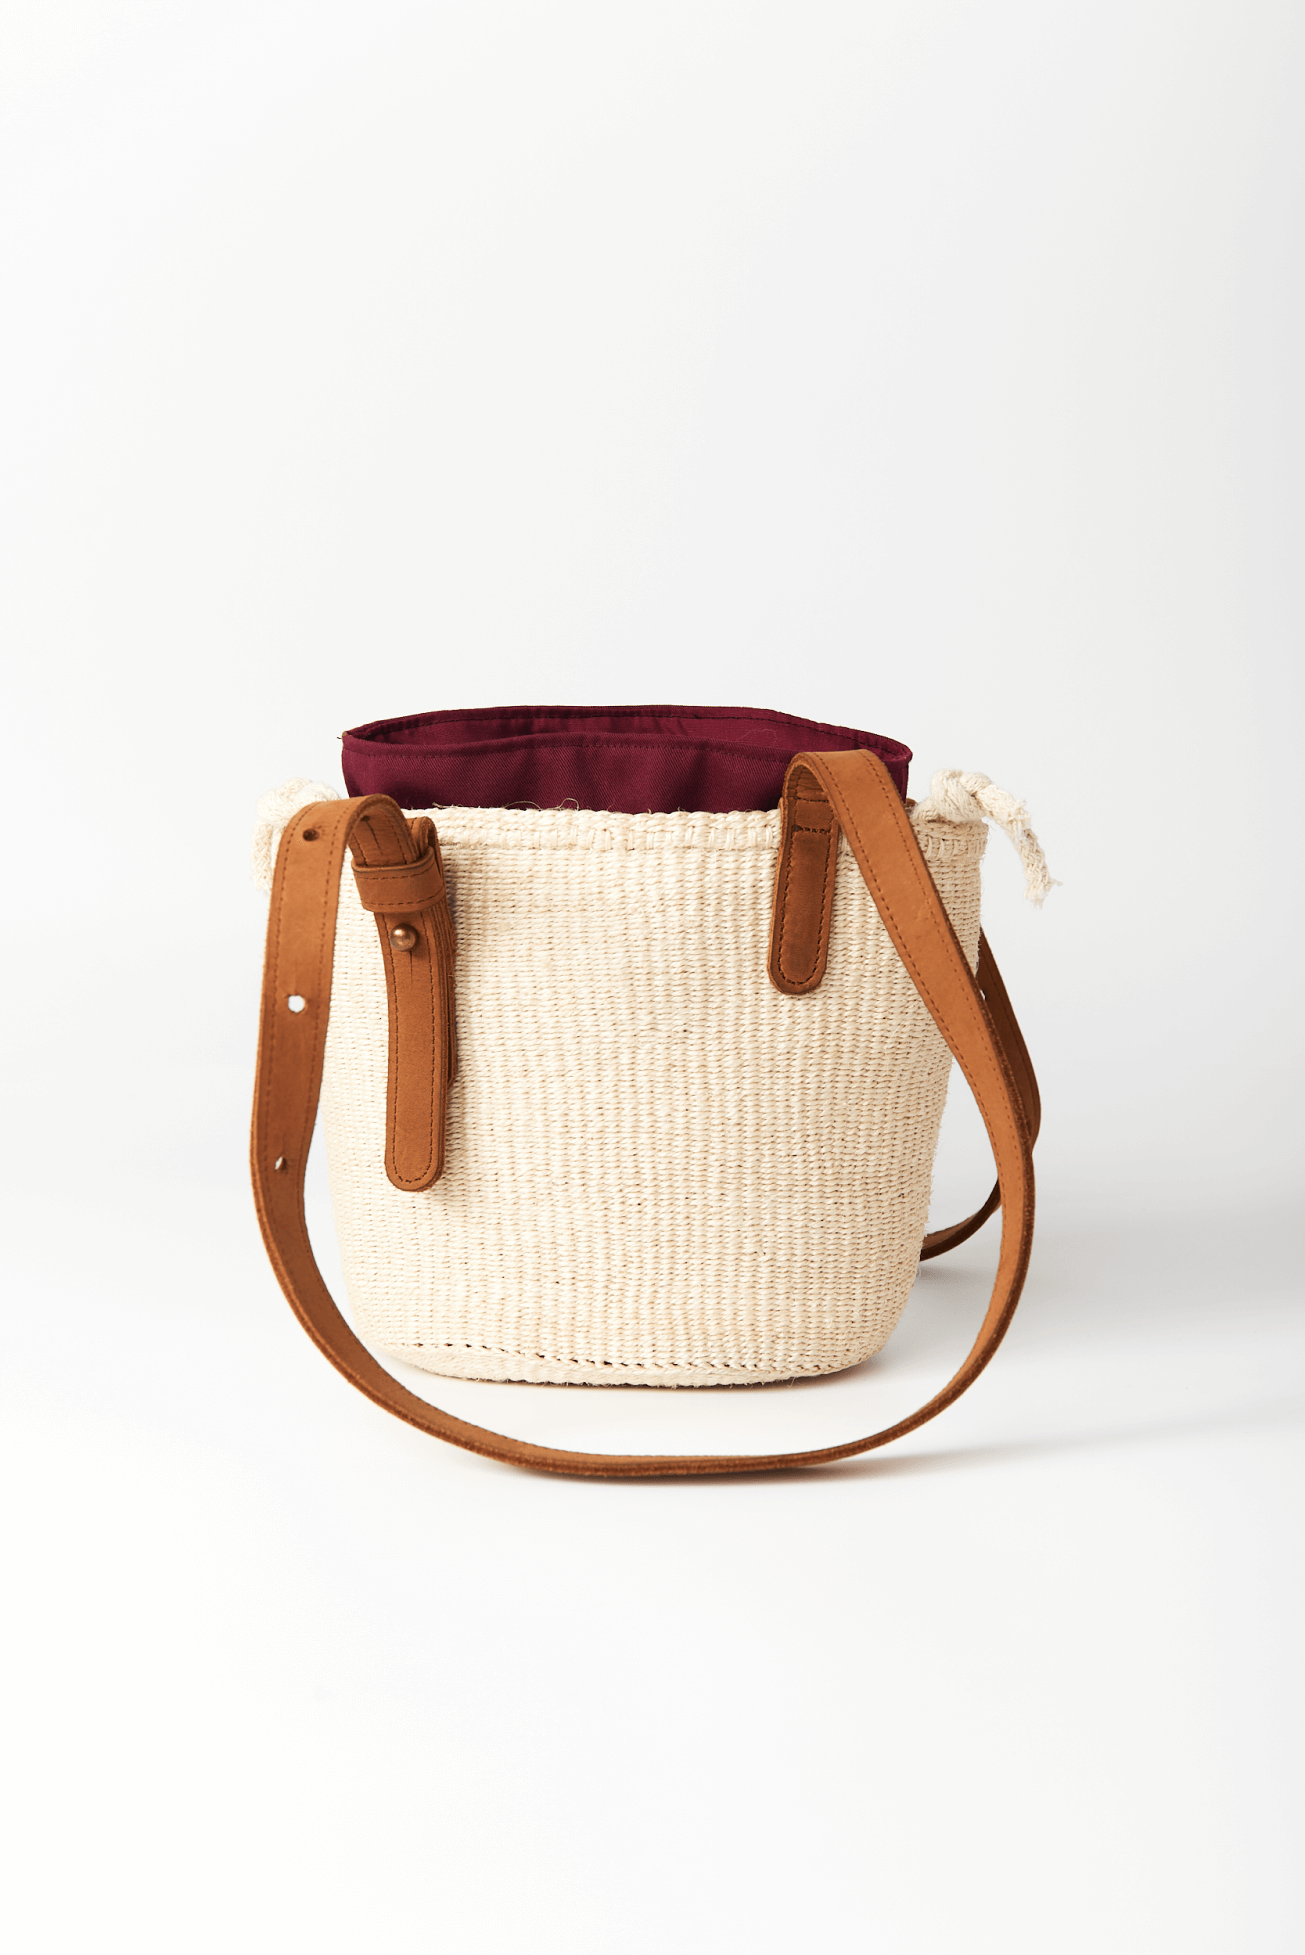 Shop Sawa Handbag by The Shaba on Arrai. Discover stylish, affordable clothing, jewelry, handbags and unique handmade pieces from top Kenyan & African fashion brands prioritising sustainability and quality craftsmanship.